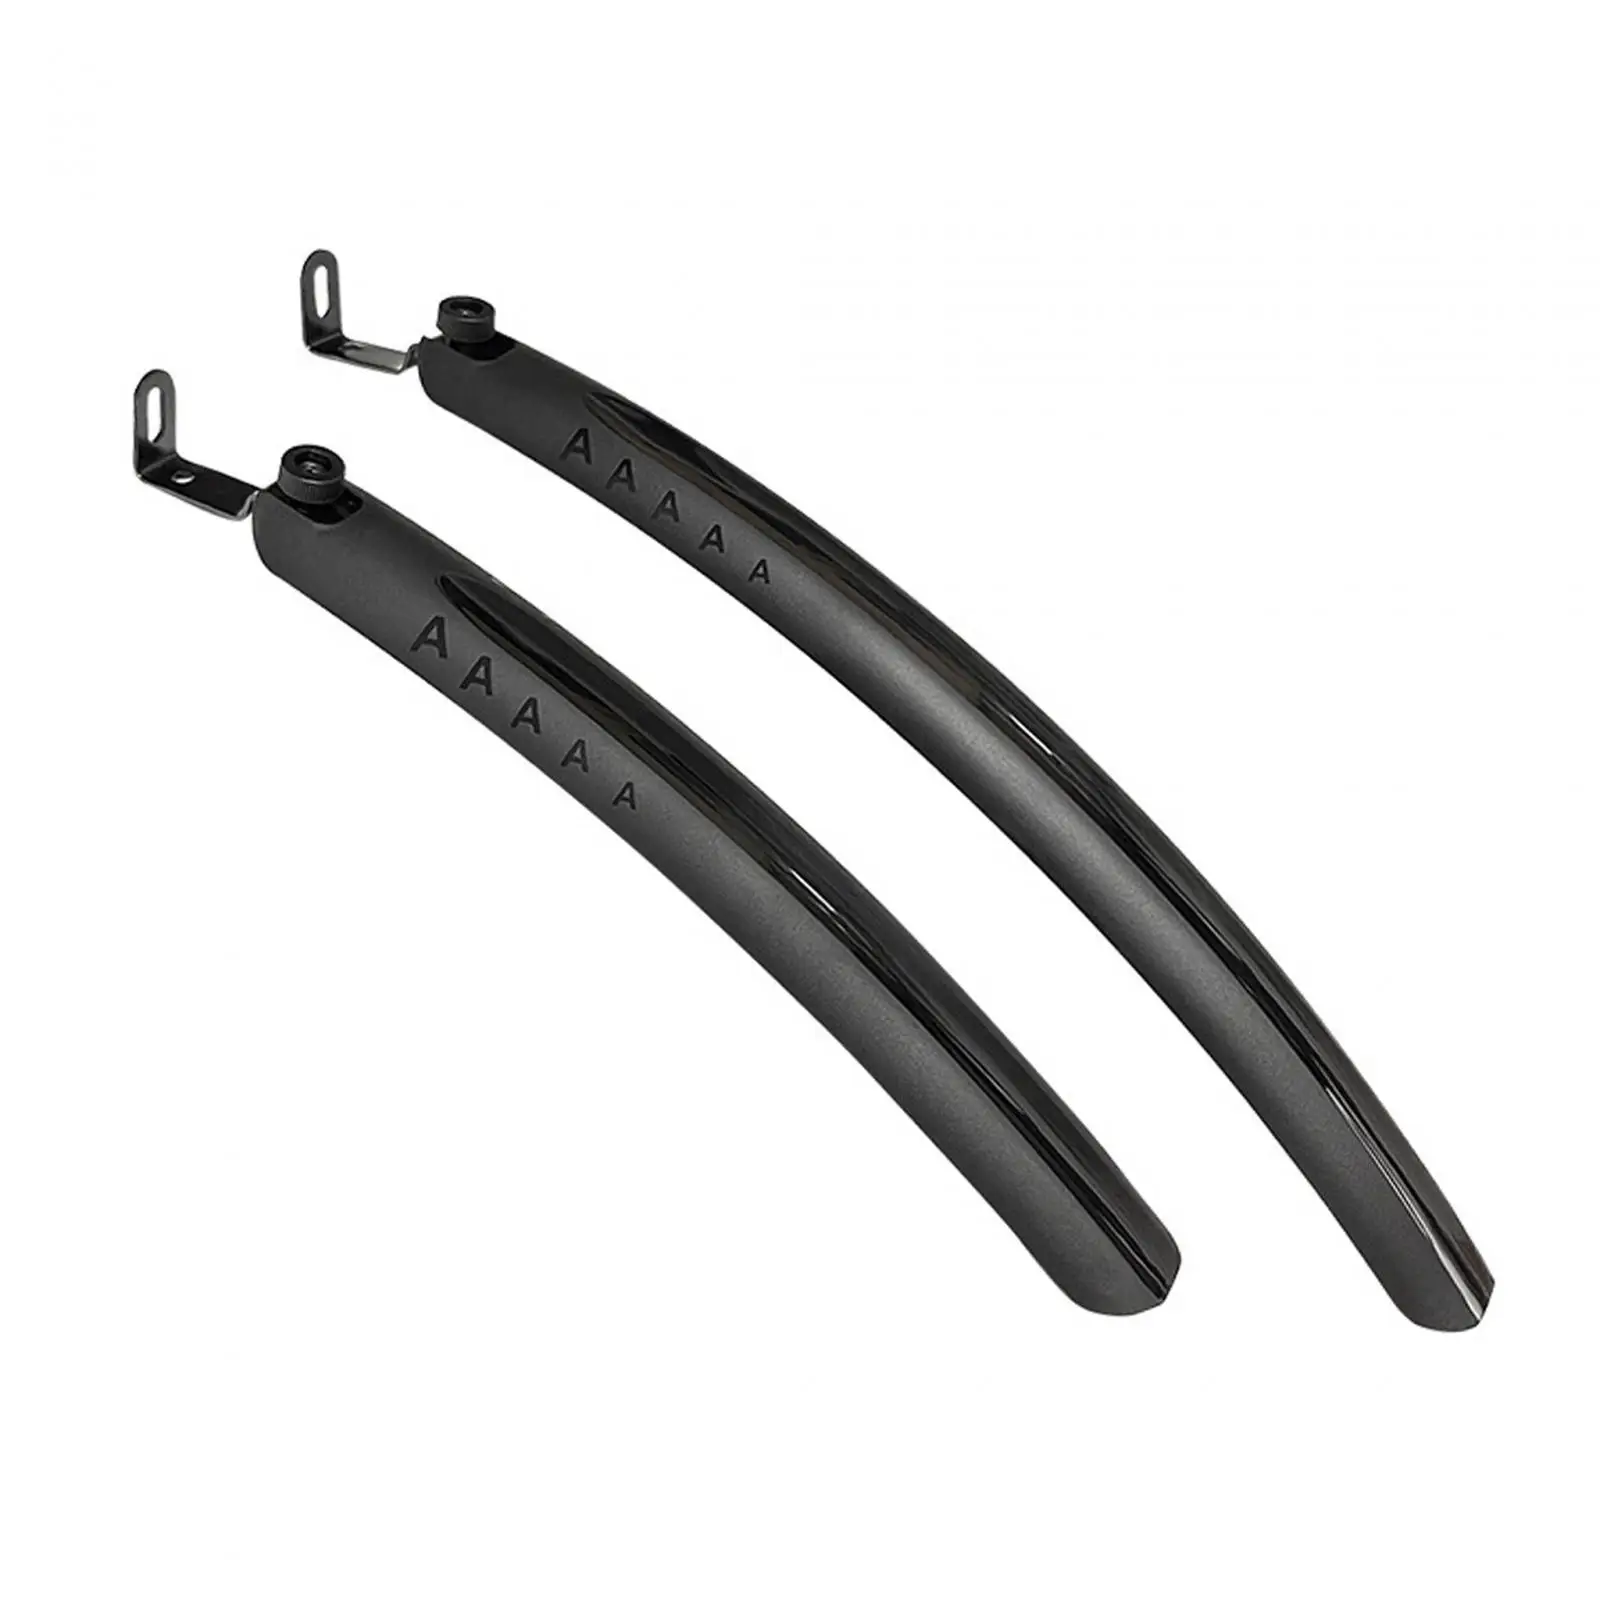 Bike Fenders Front and Rear Mud Guard Mudguards for 26